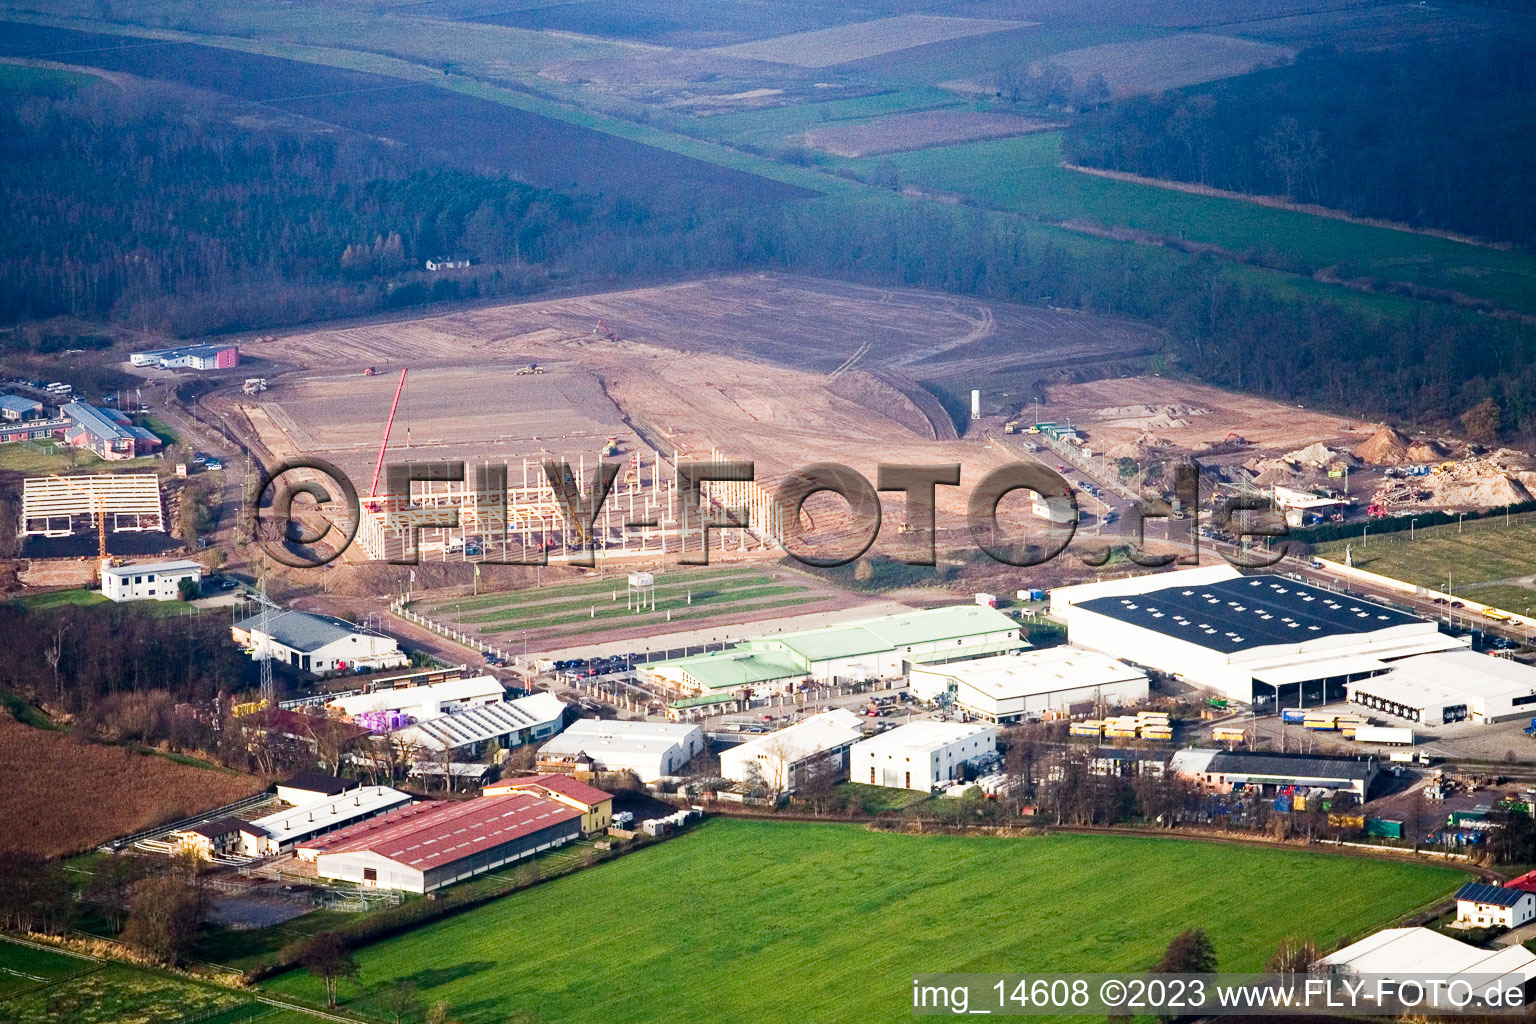 Oblique view of Am Horst industrial area in the district Minderslachen in Kandel in the state Rhineland-Palatinate, Germany